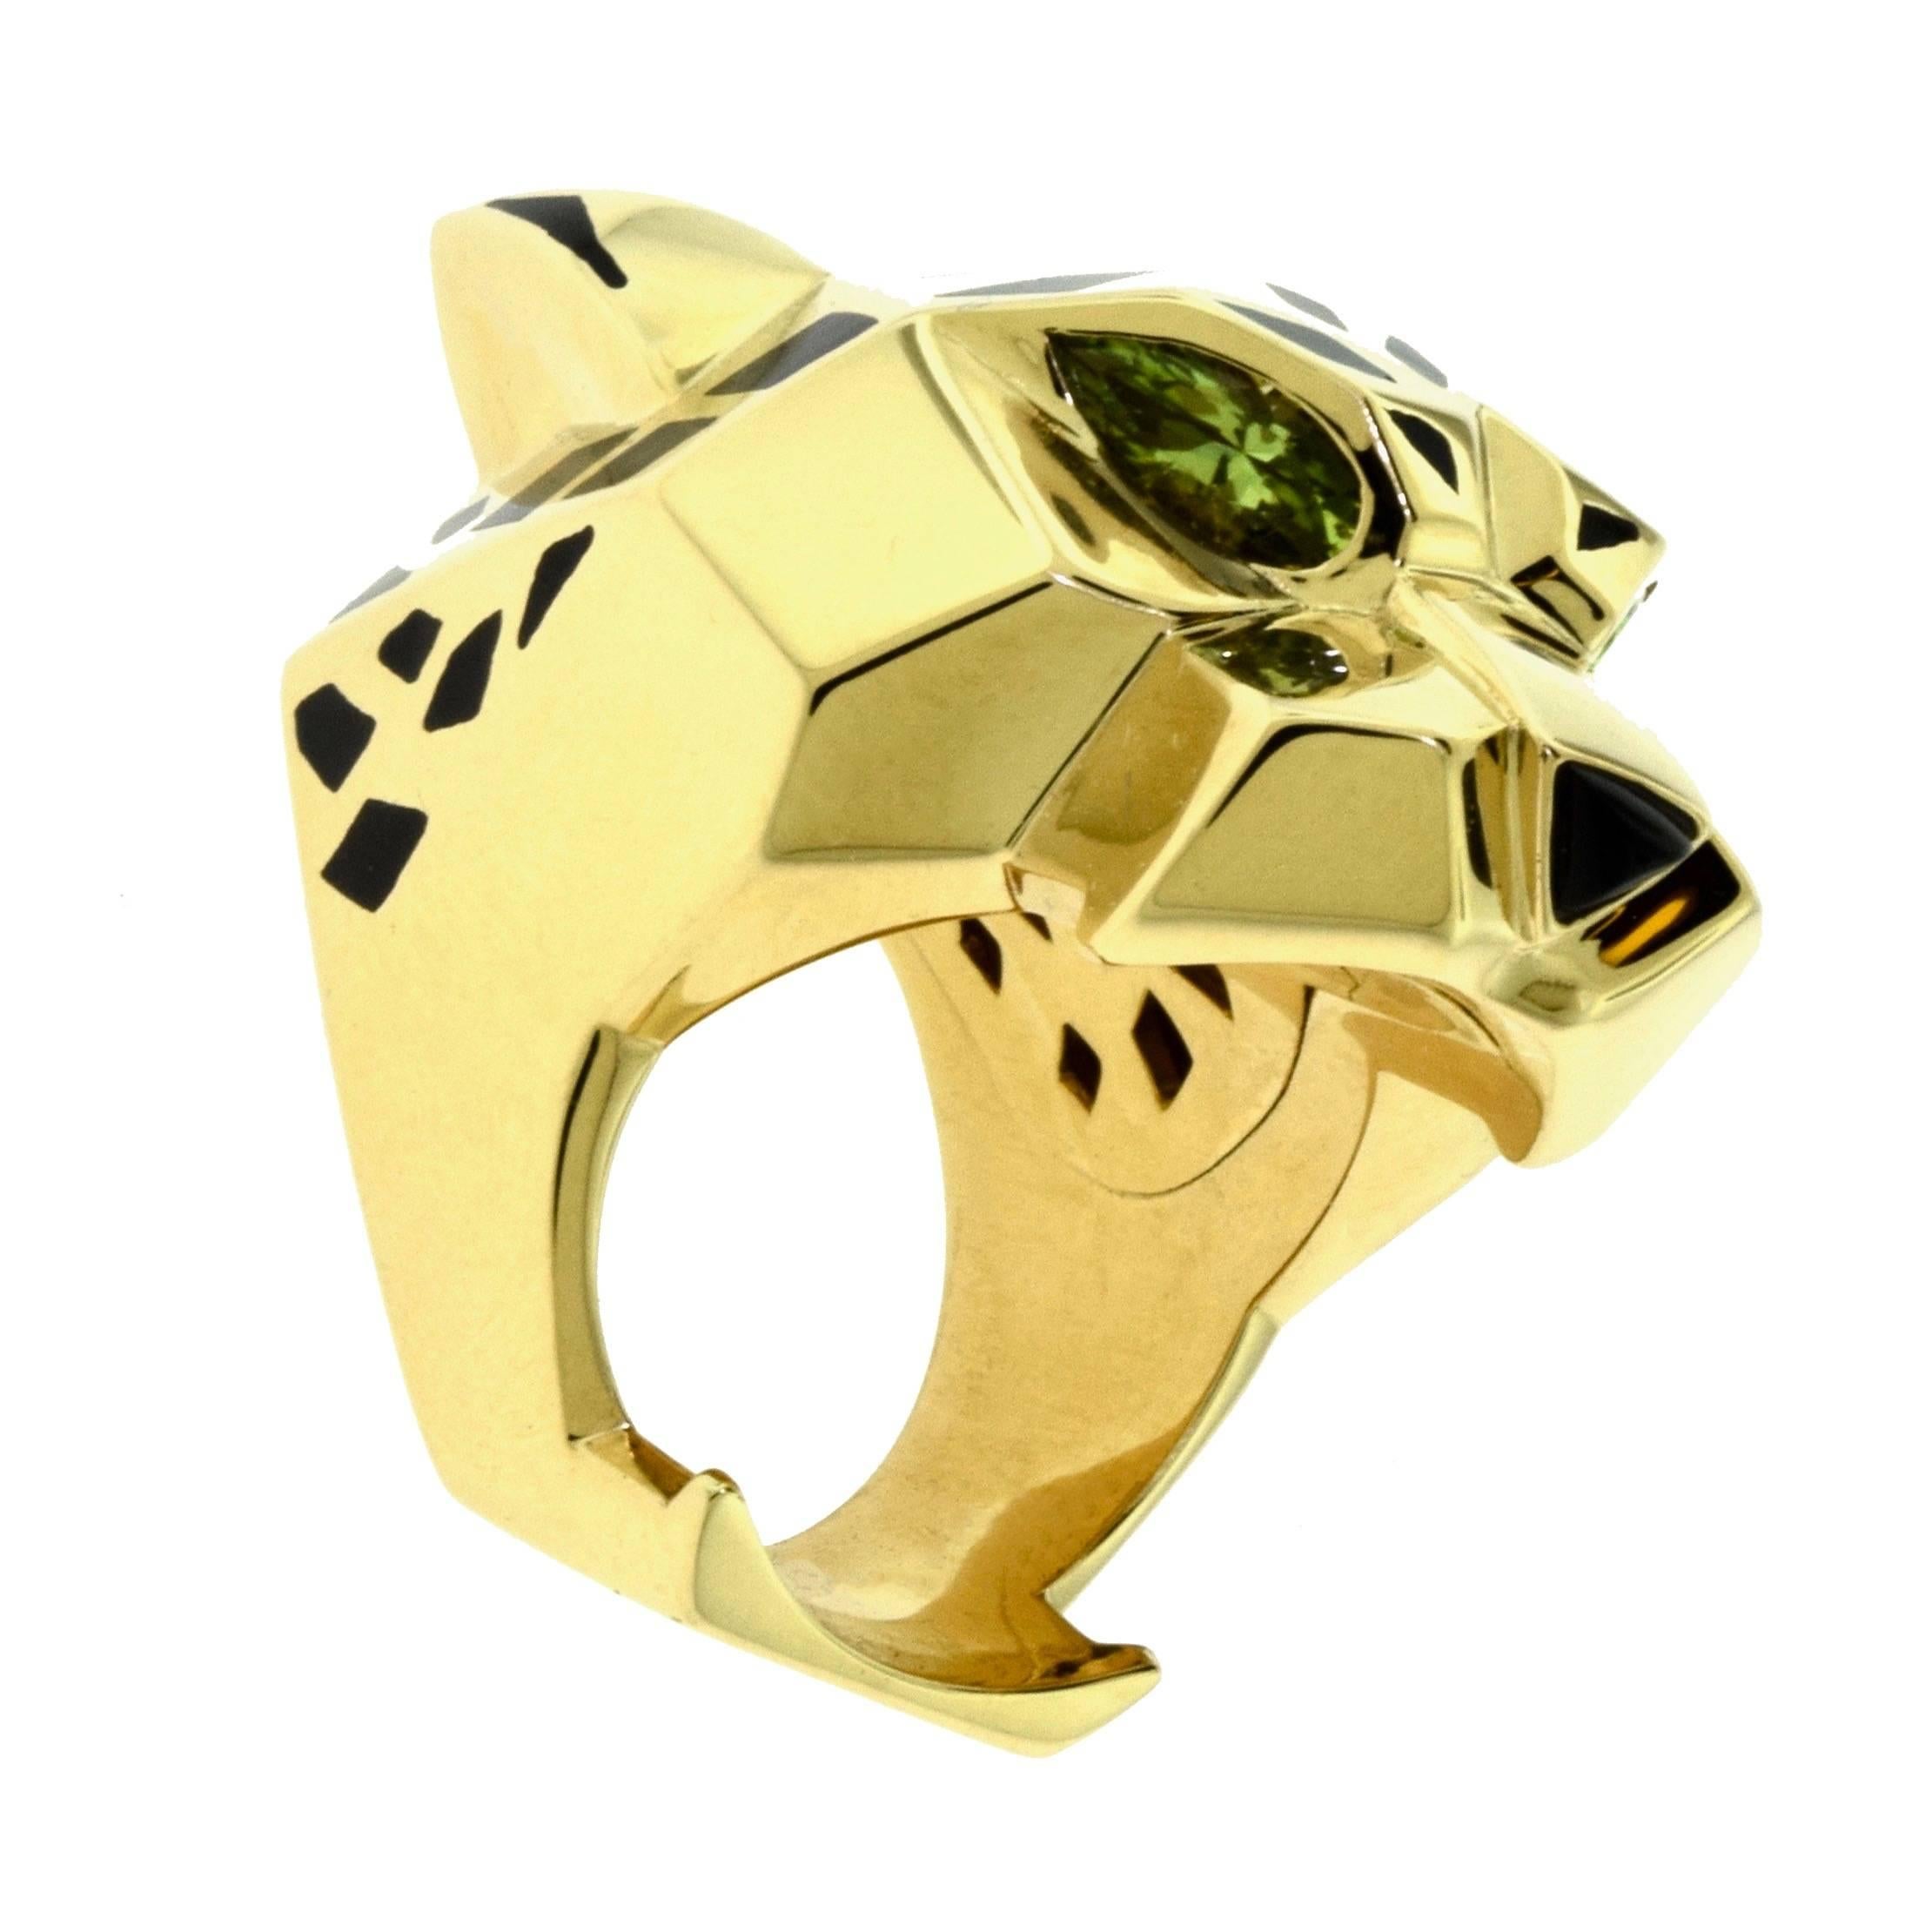 Designer: Cartier
Collection: Panthère de Cartier 
Metal: Yellow Gold
Metal Purity: 18k
Stones: Onyx, Peridot
Non-Metal Material: Lacquer
Total Item Weight (g): 58.3
Ring Size: 8.25 (US) ; 58 (euro)
Hallmark: Cartier 58 Serial No. 750
Collateral: